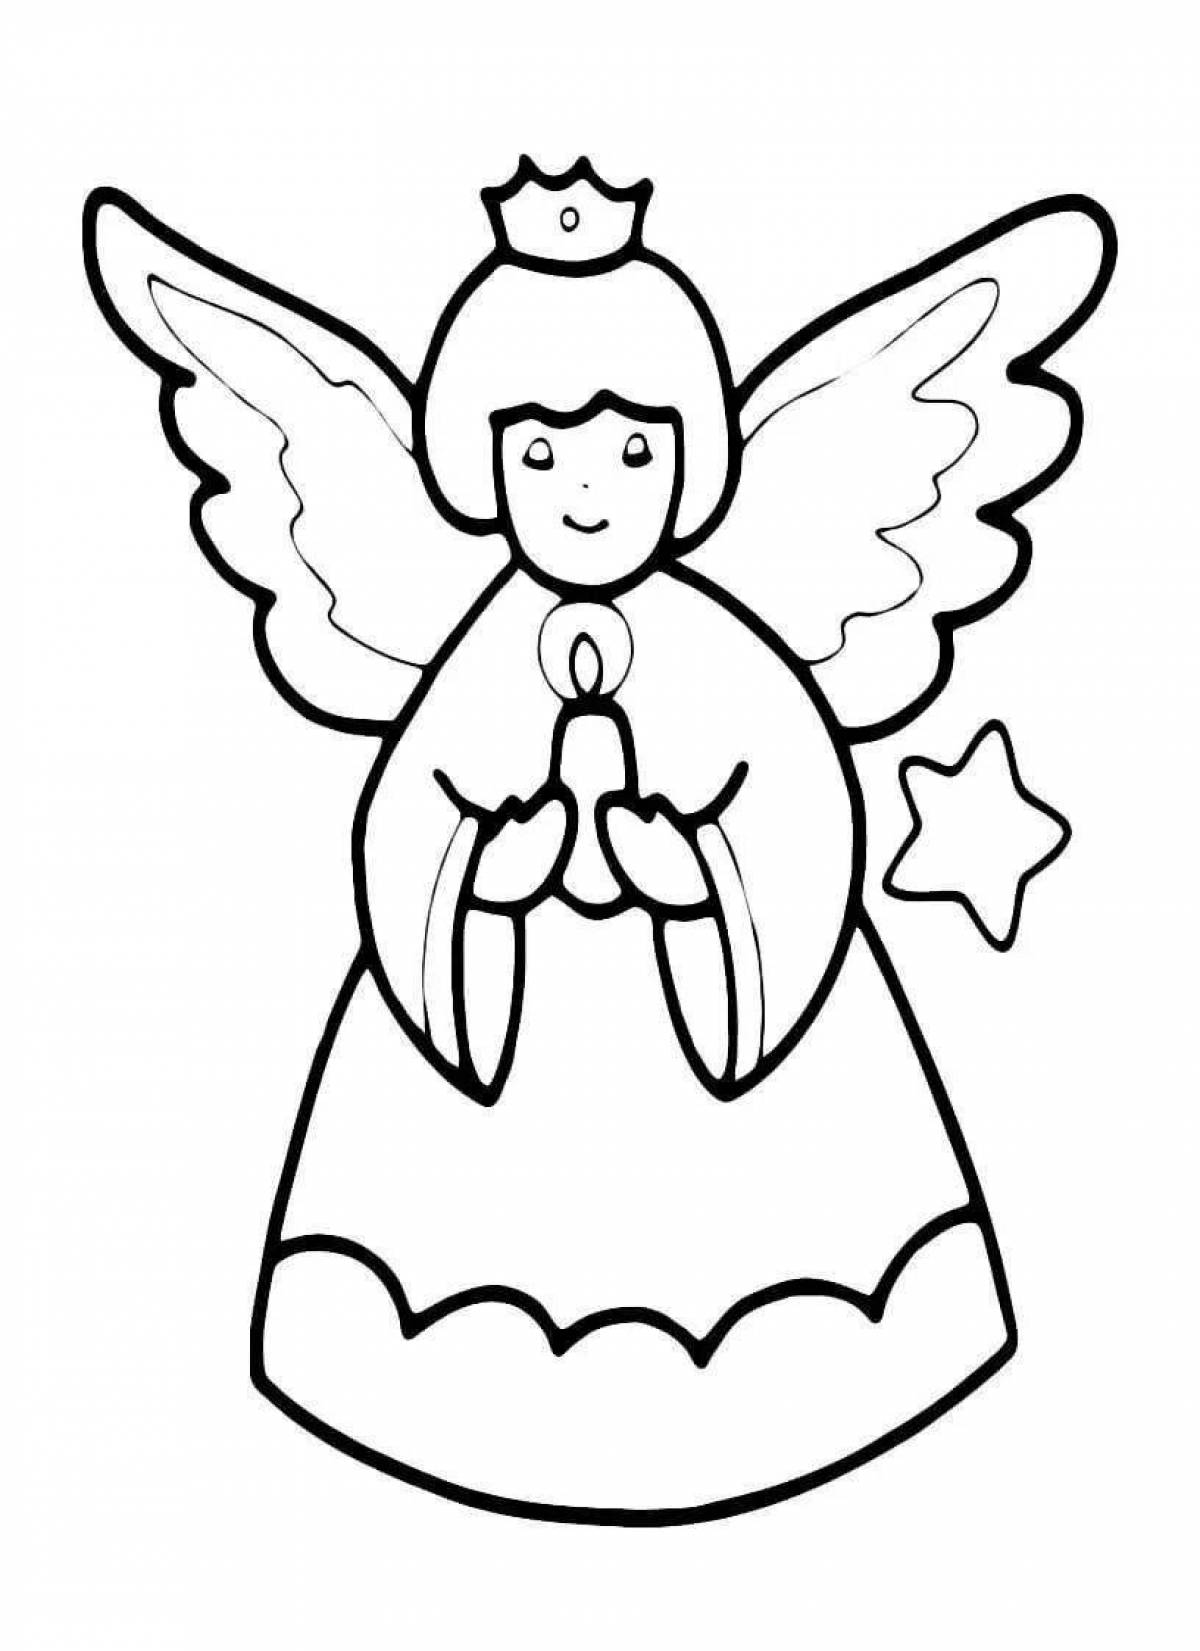 Glitter Christmas angels coloring book